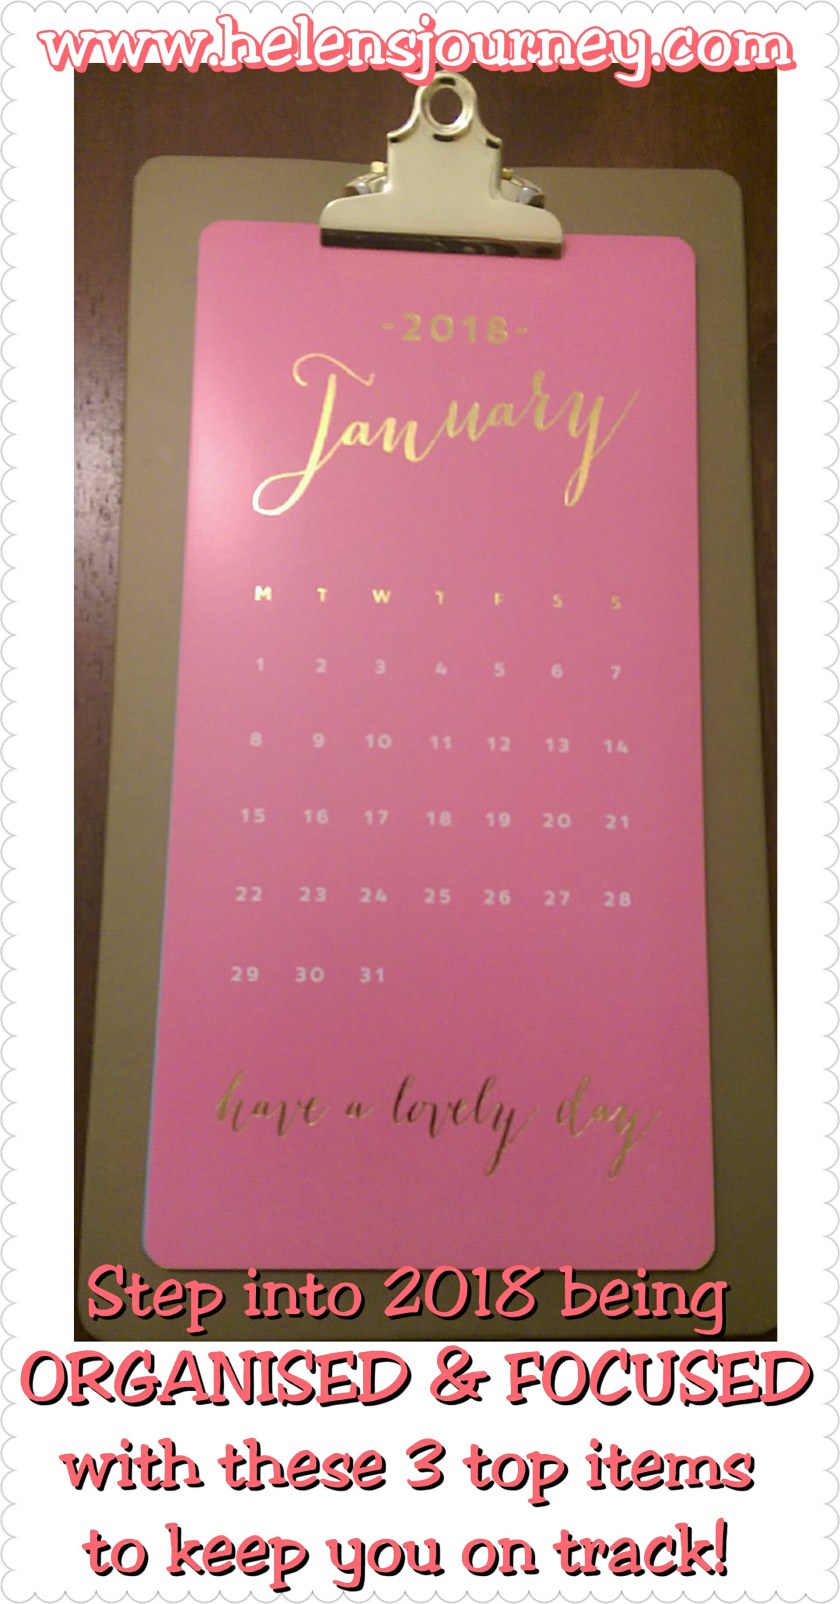 stay organised with a calendar for the new year by helens journey